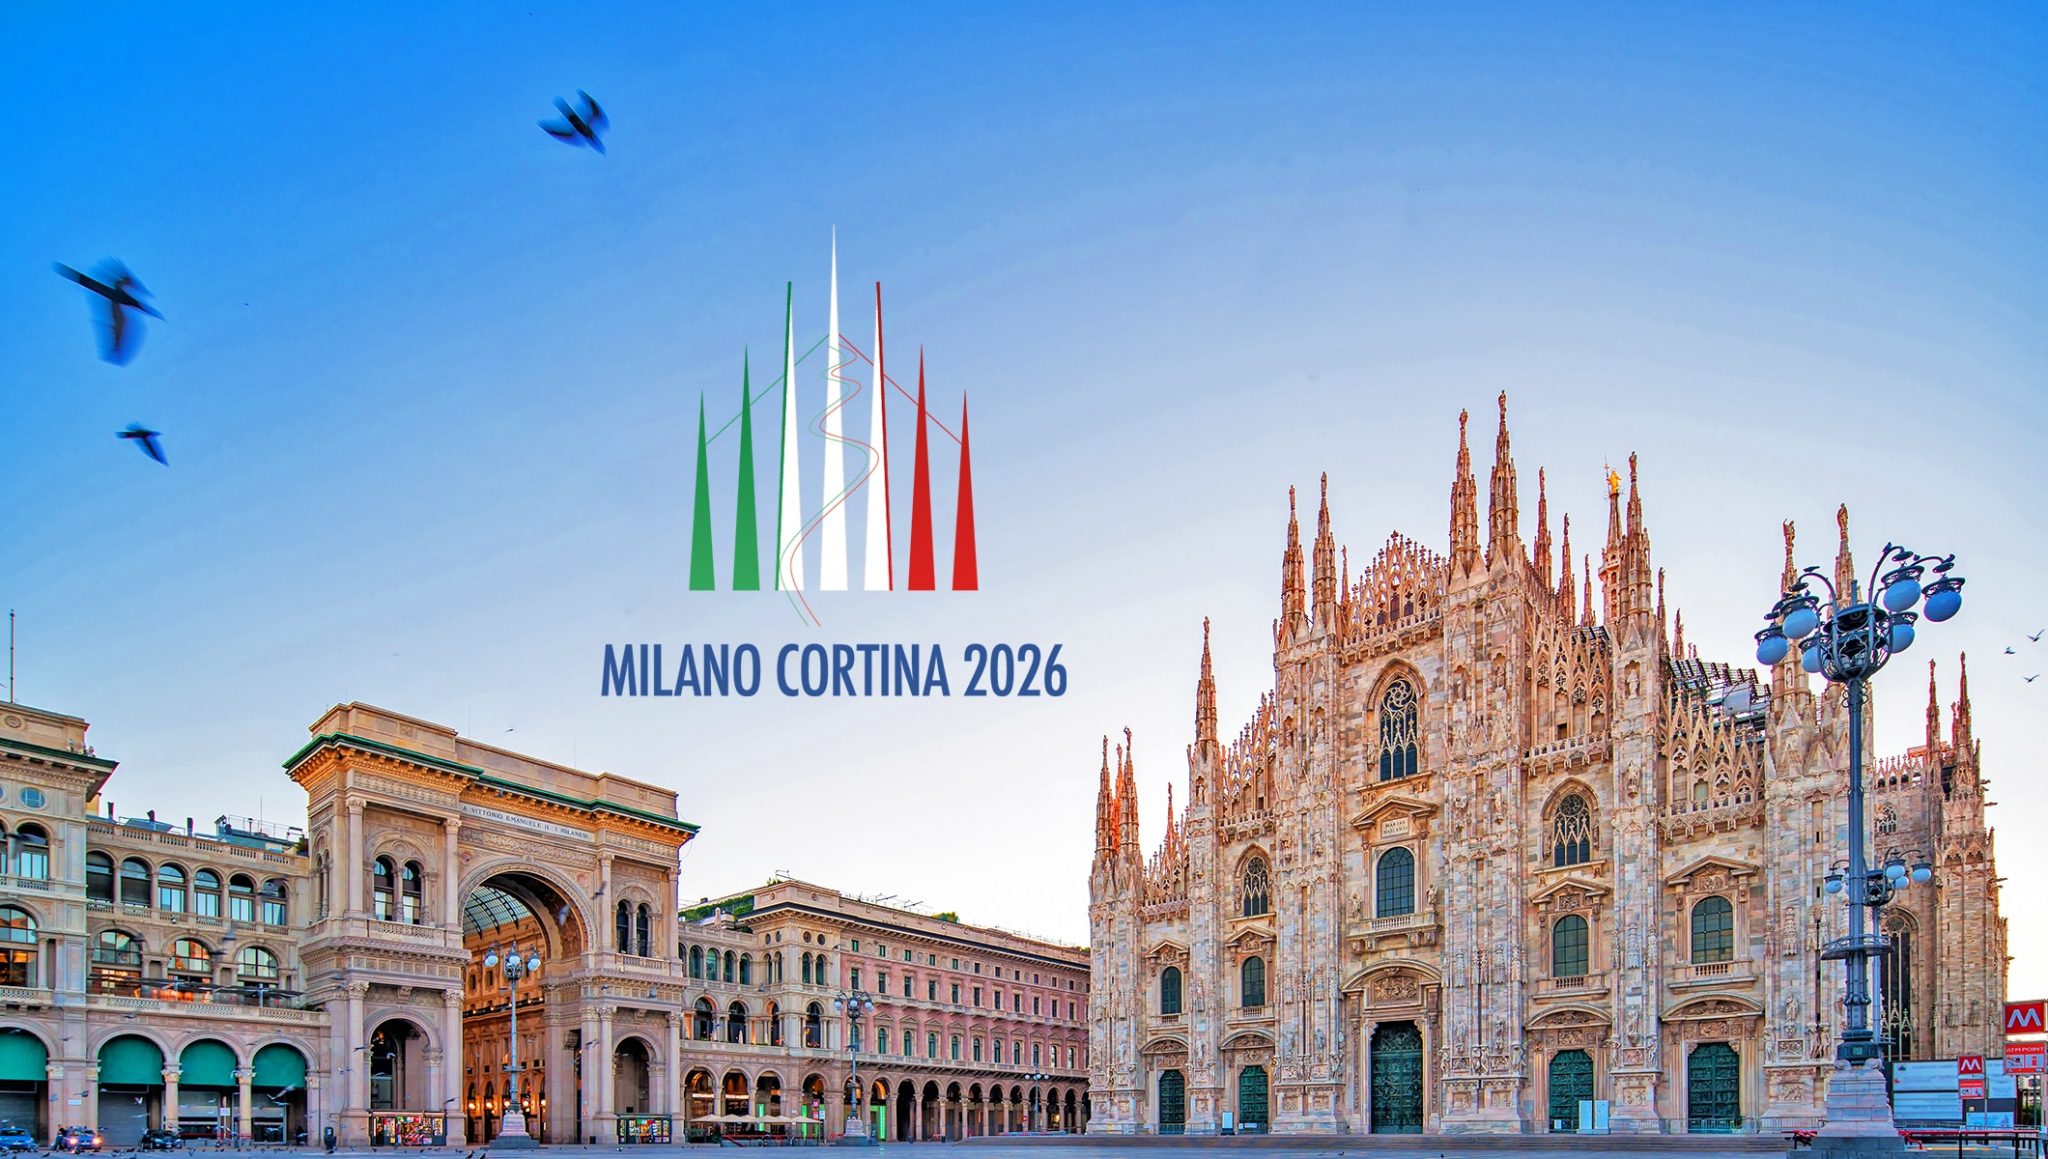 The International Testing Agency and NADO Italia have formed a strategic partnership in the run-up to the Milan Cortina 2026 Winter Olympics and Paralympics ©Milan Cortina 2026